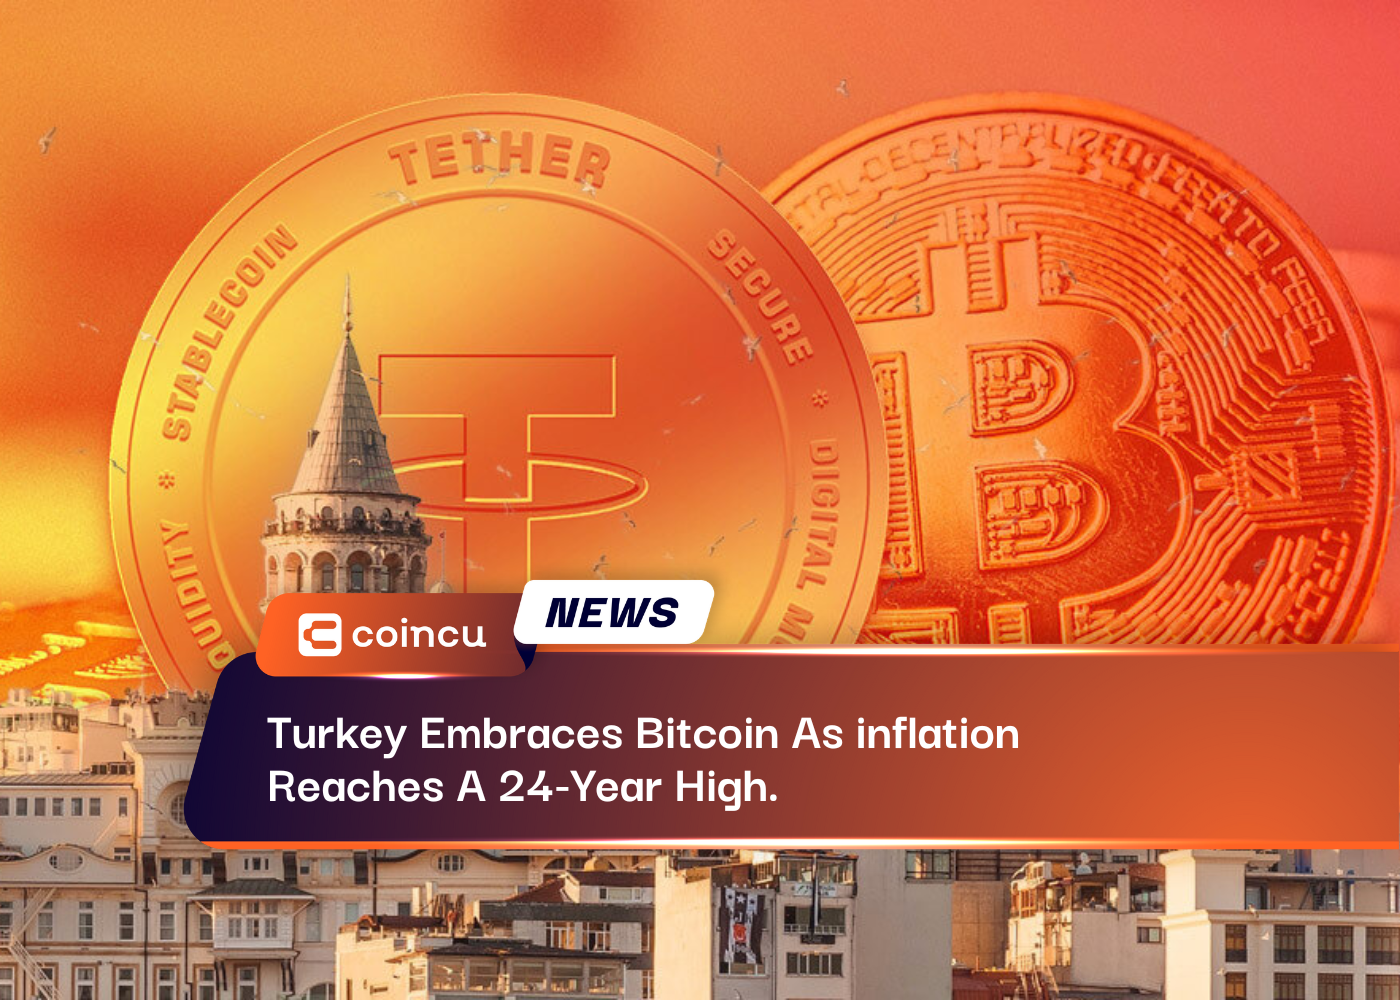 Turkey Embraces Bitcoin As inflation Reaches A 24-Year High.